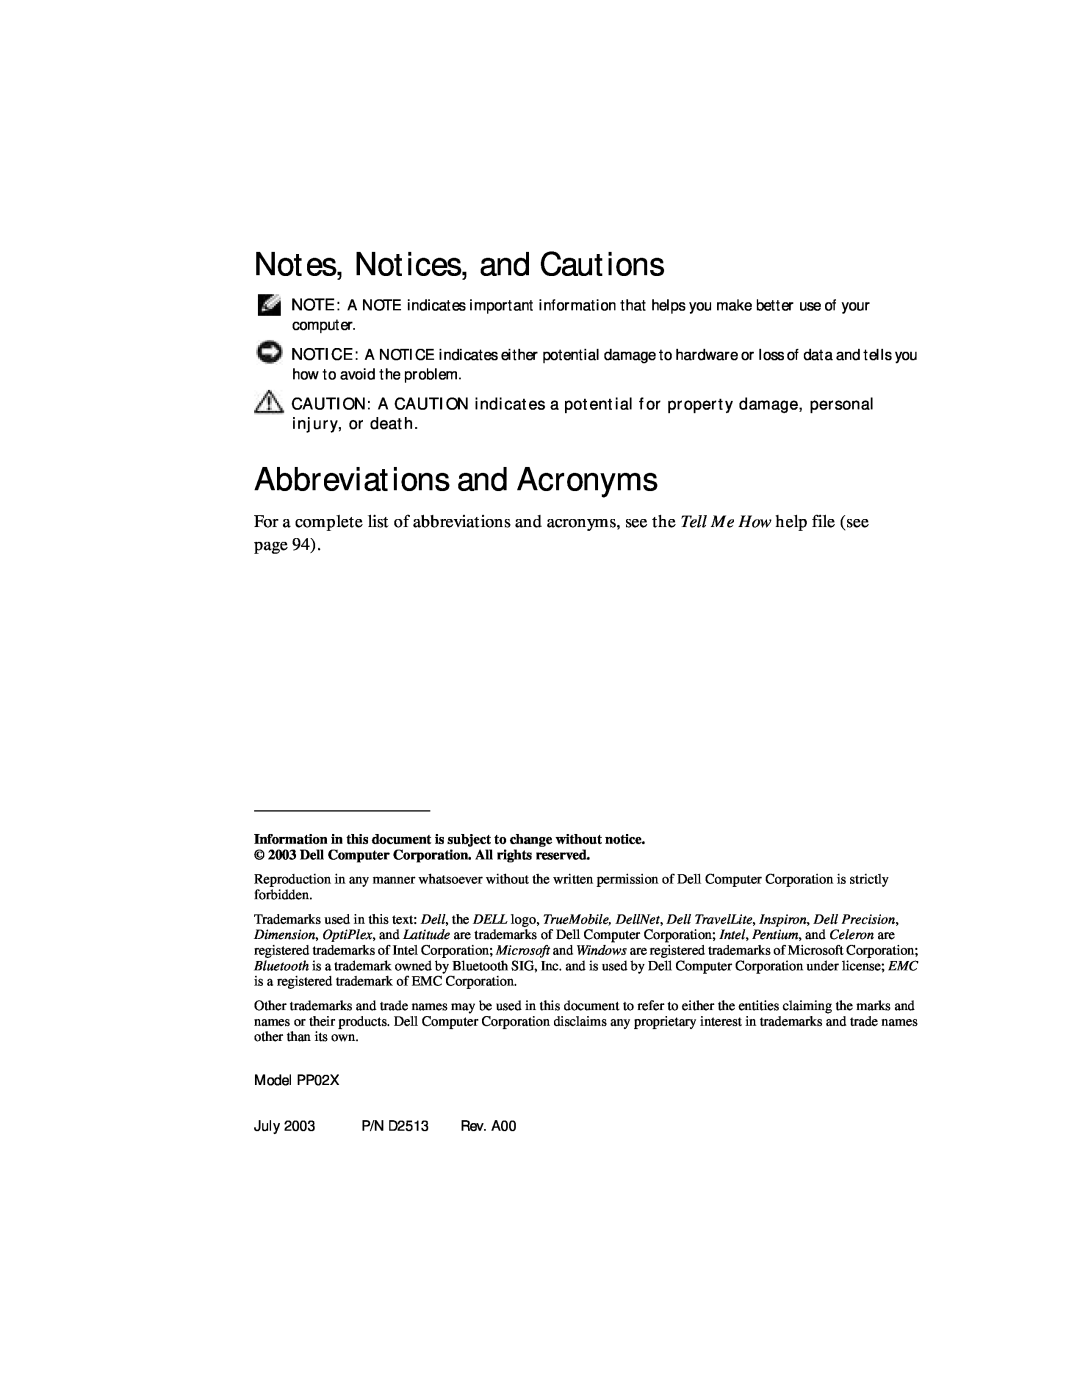 Dell 8600 manual Notes, Notices, and Cautions, Abbreviations and Acronyms, Model PP02X, July, P/N D2513 